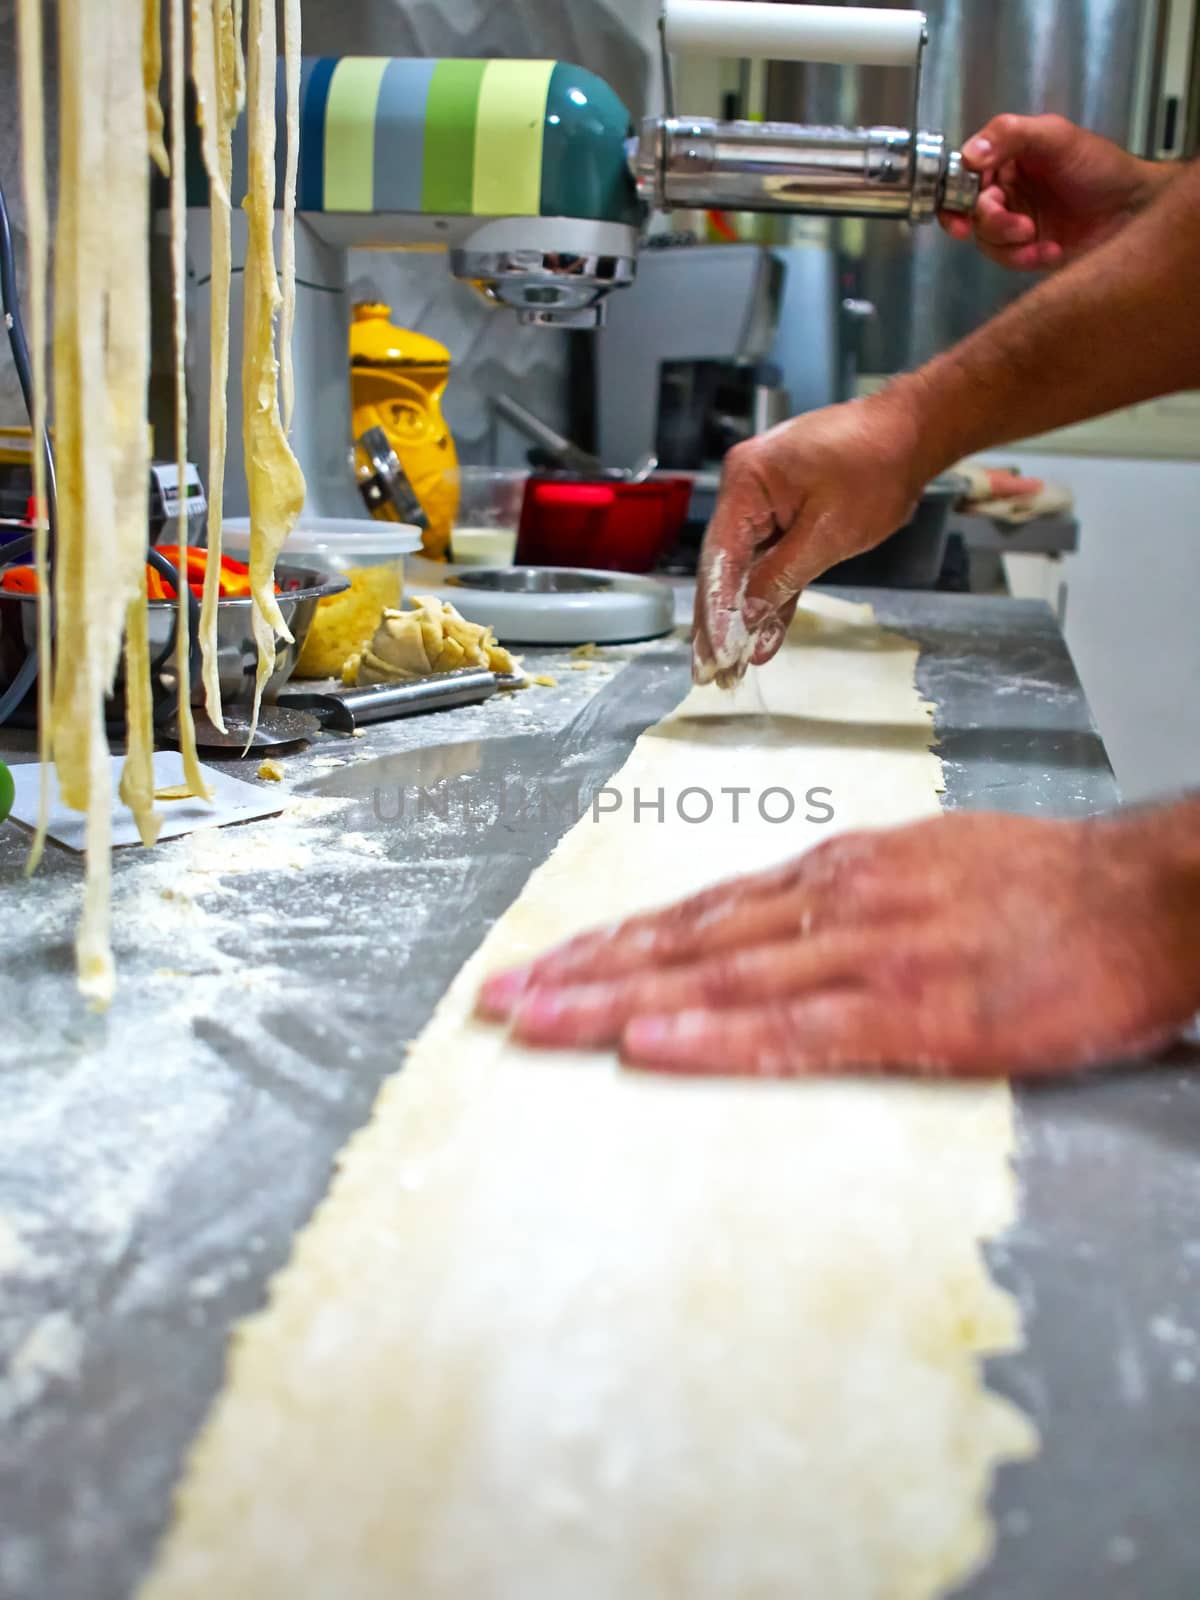 Close details of making traditional Italian homemade pasta noodles